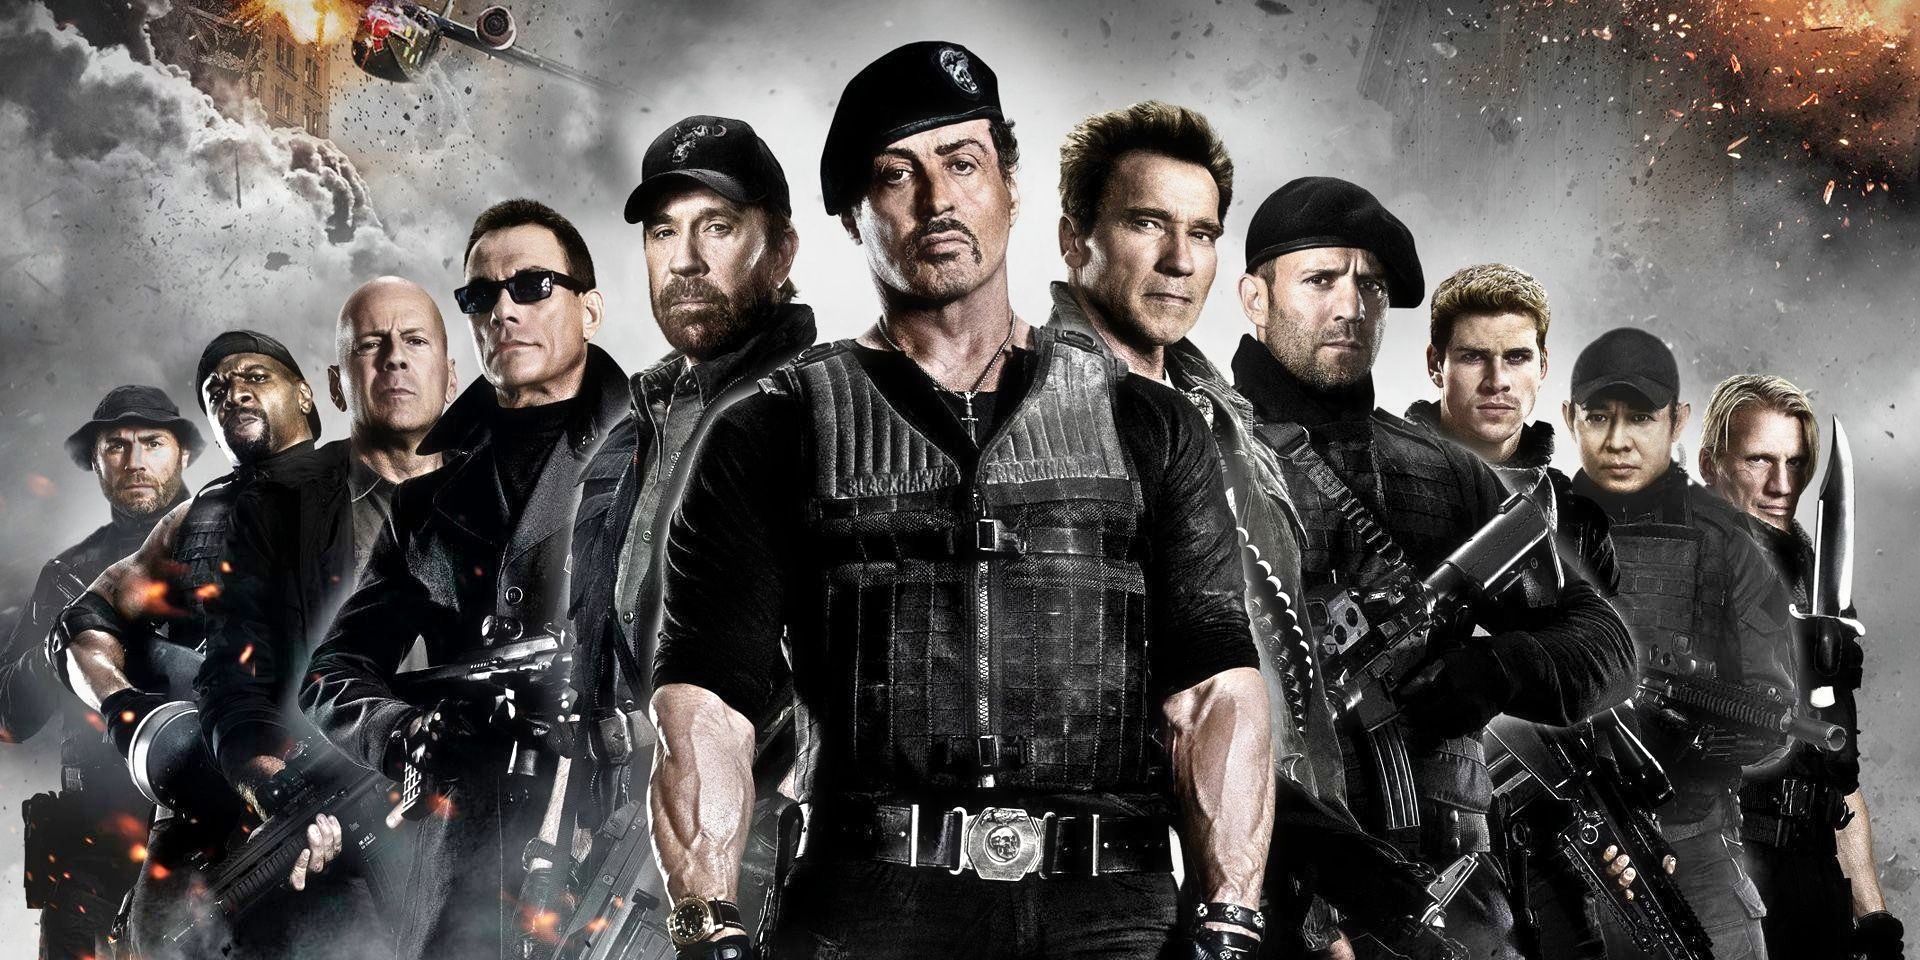 The Expendables franchise cast lined up in a promotional shot.